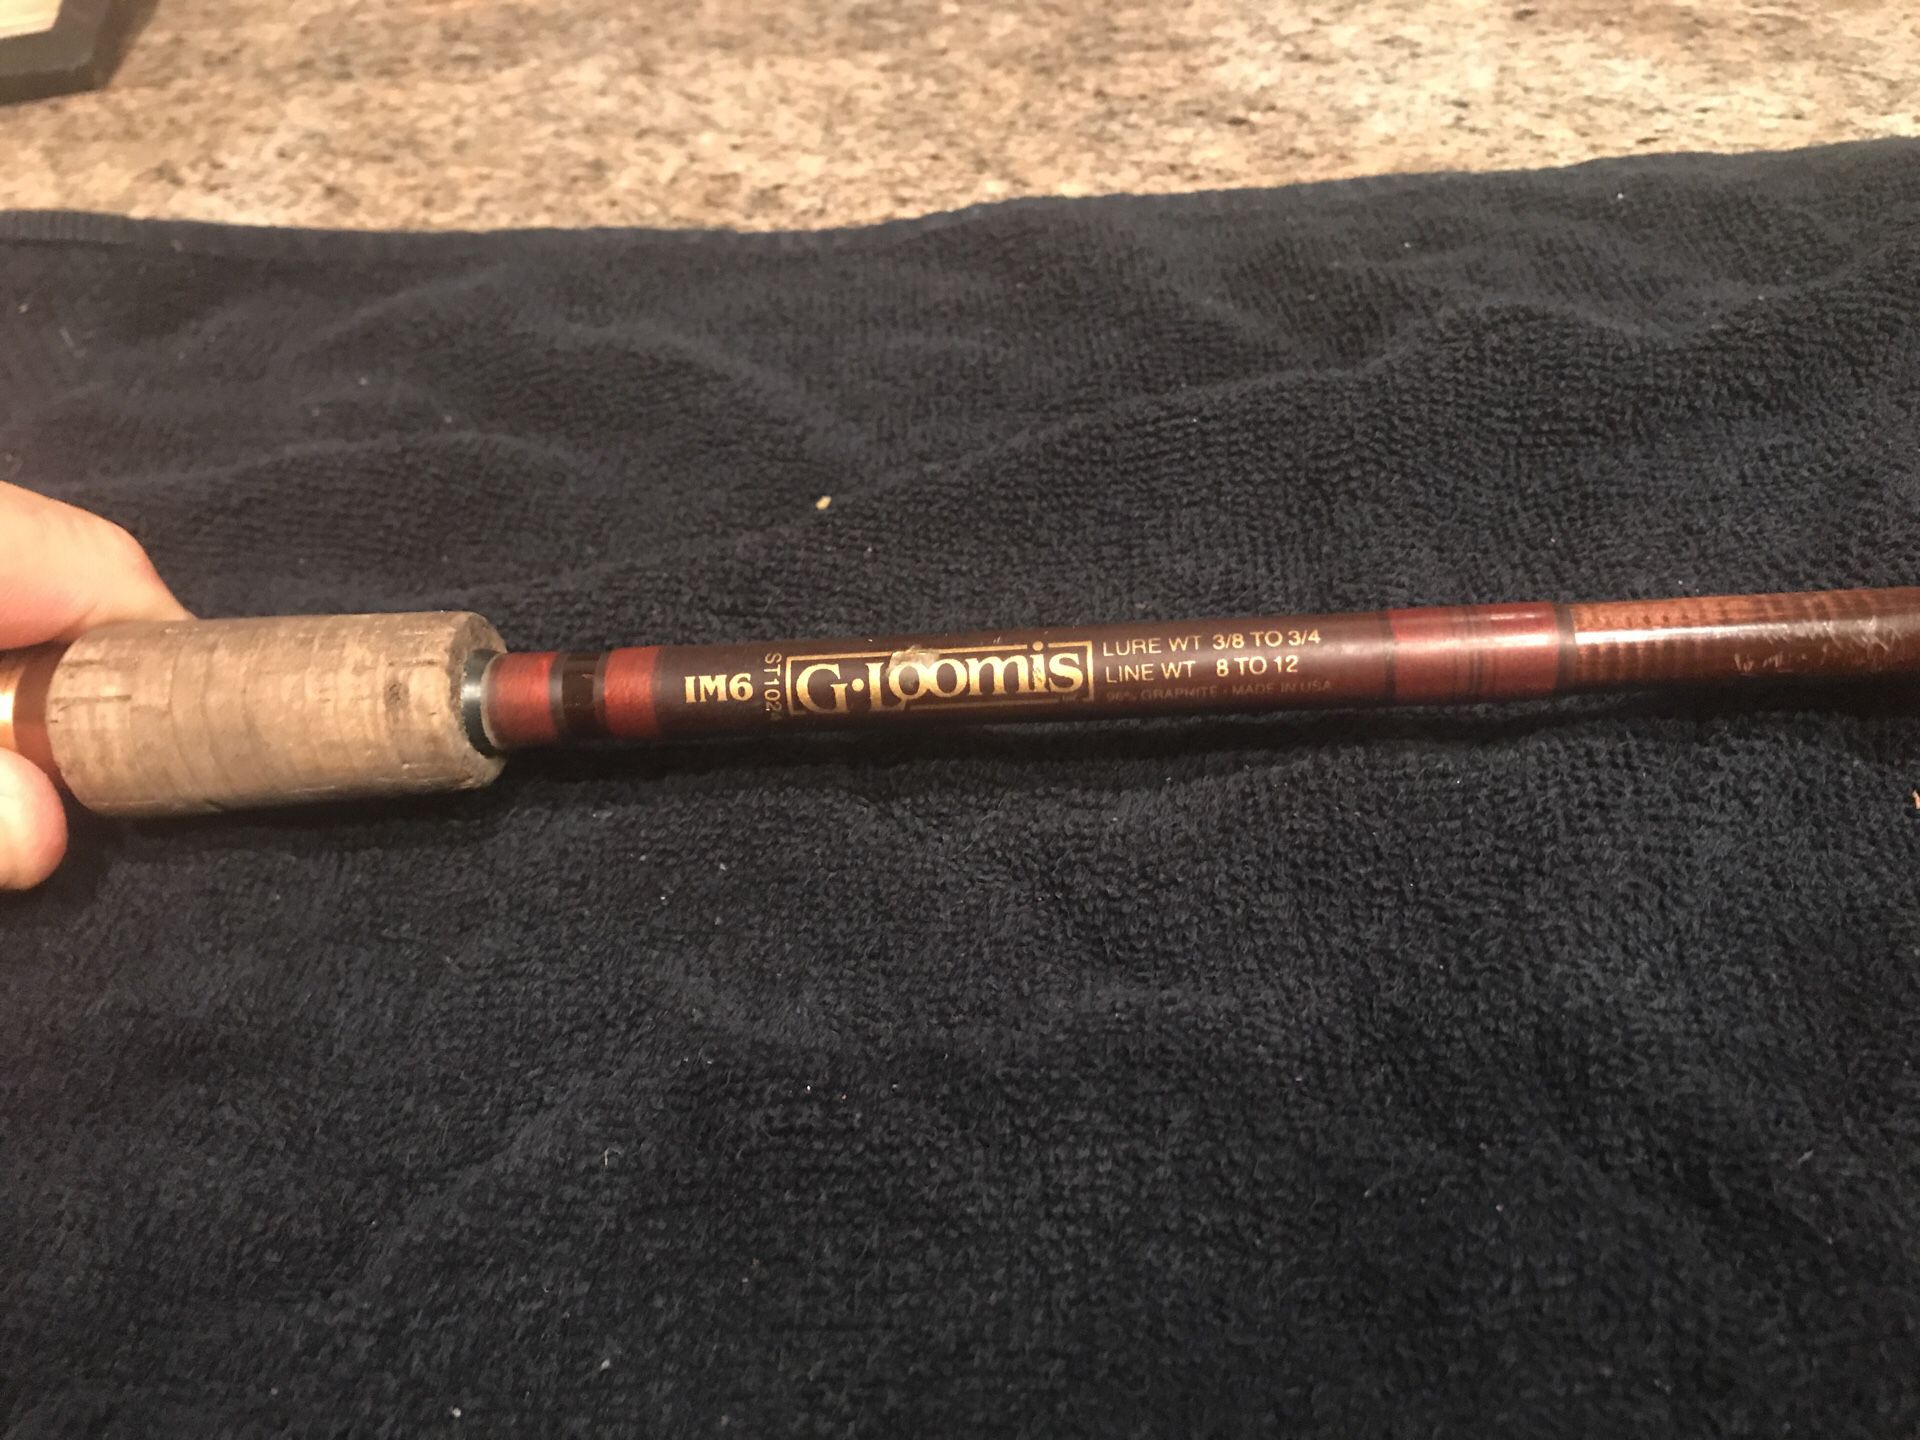 G-loomis im6 Fishing rod USA ST1024 for Sale in San Leandro, CA